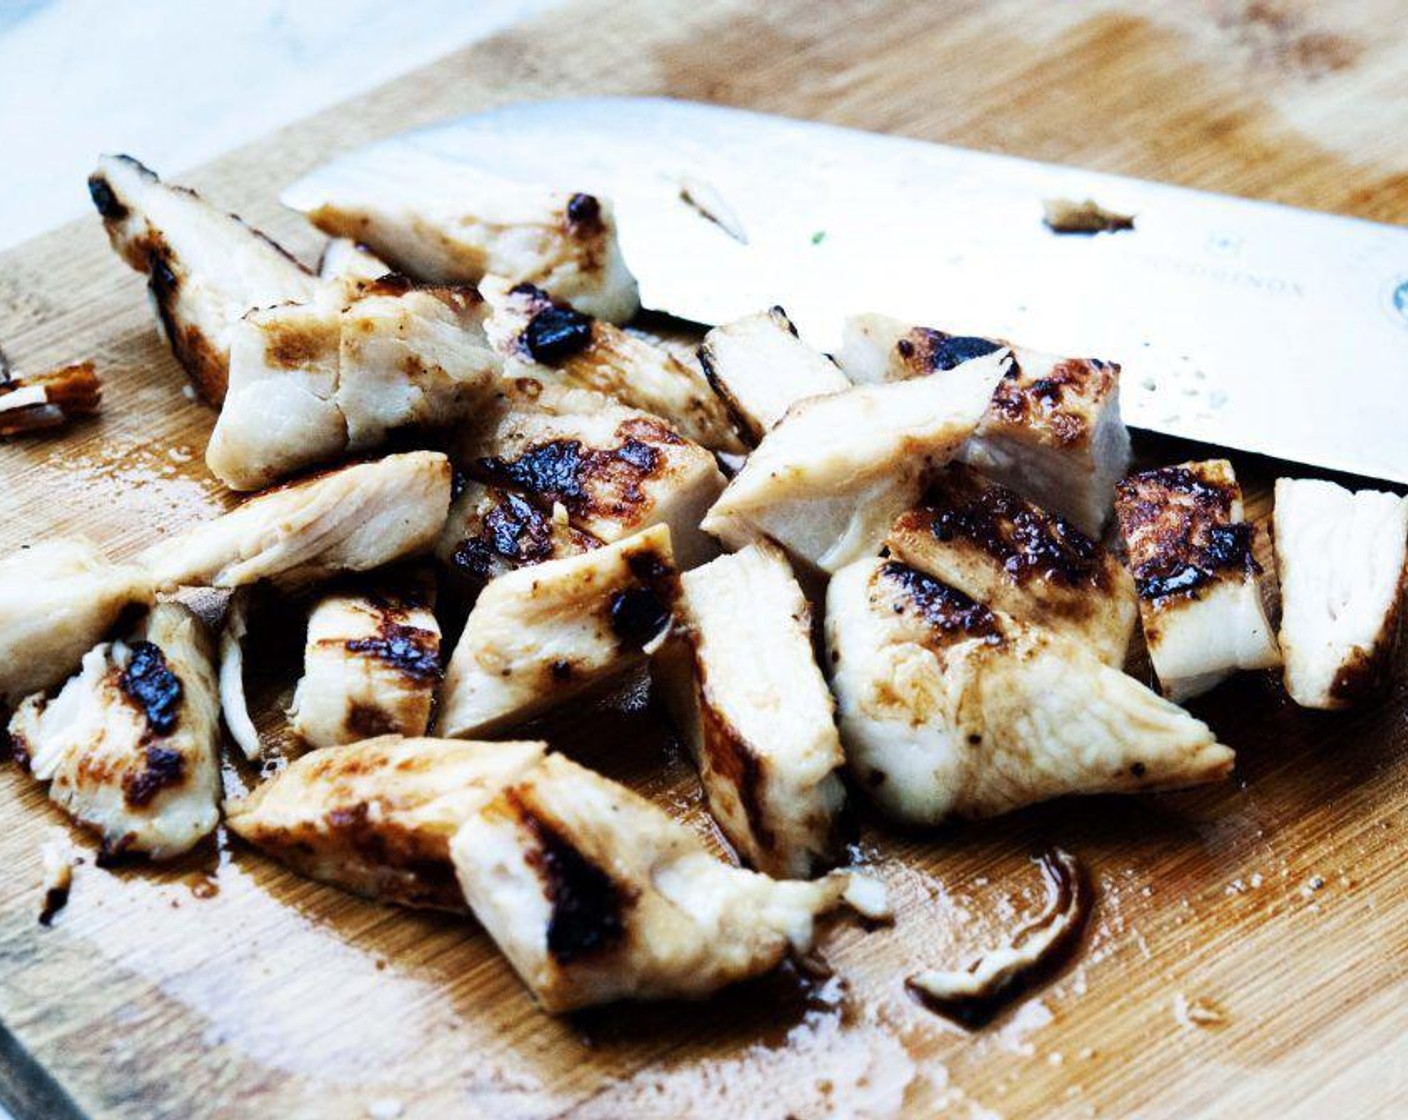 step 5 Skin and slice up the Chicken Breasts (9 oz), season with Salt (to taste) and Ground Black Pepper (to taste), and cook it on a hot grill. Then cut it up into cubes.